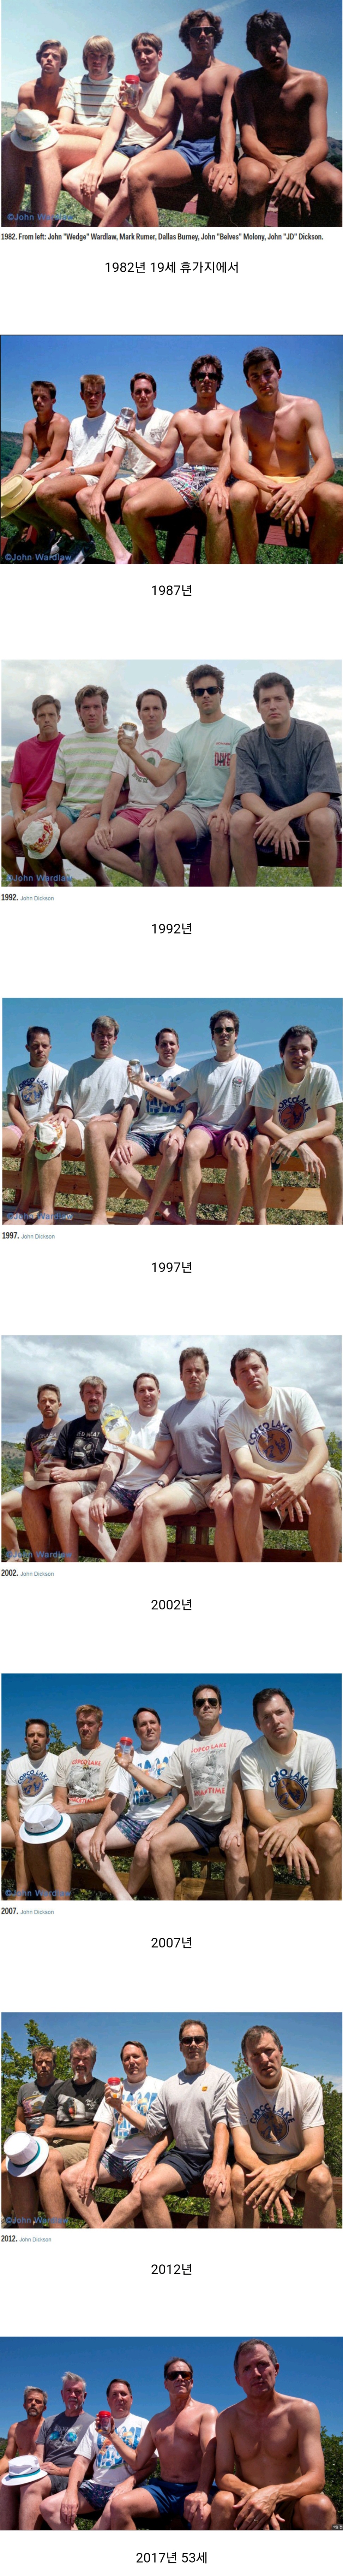 A picture taken by five friends every five years for 35 years.